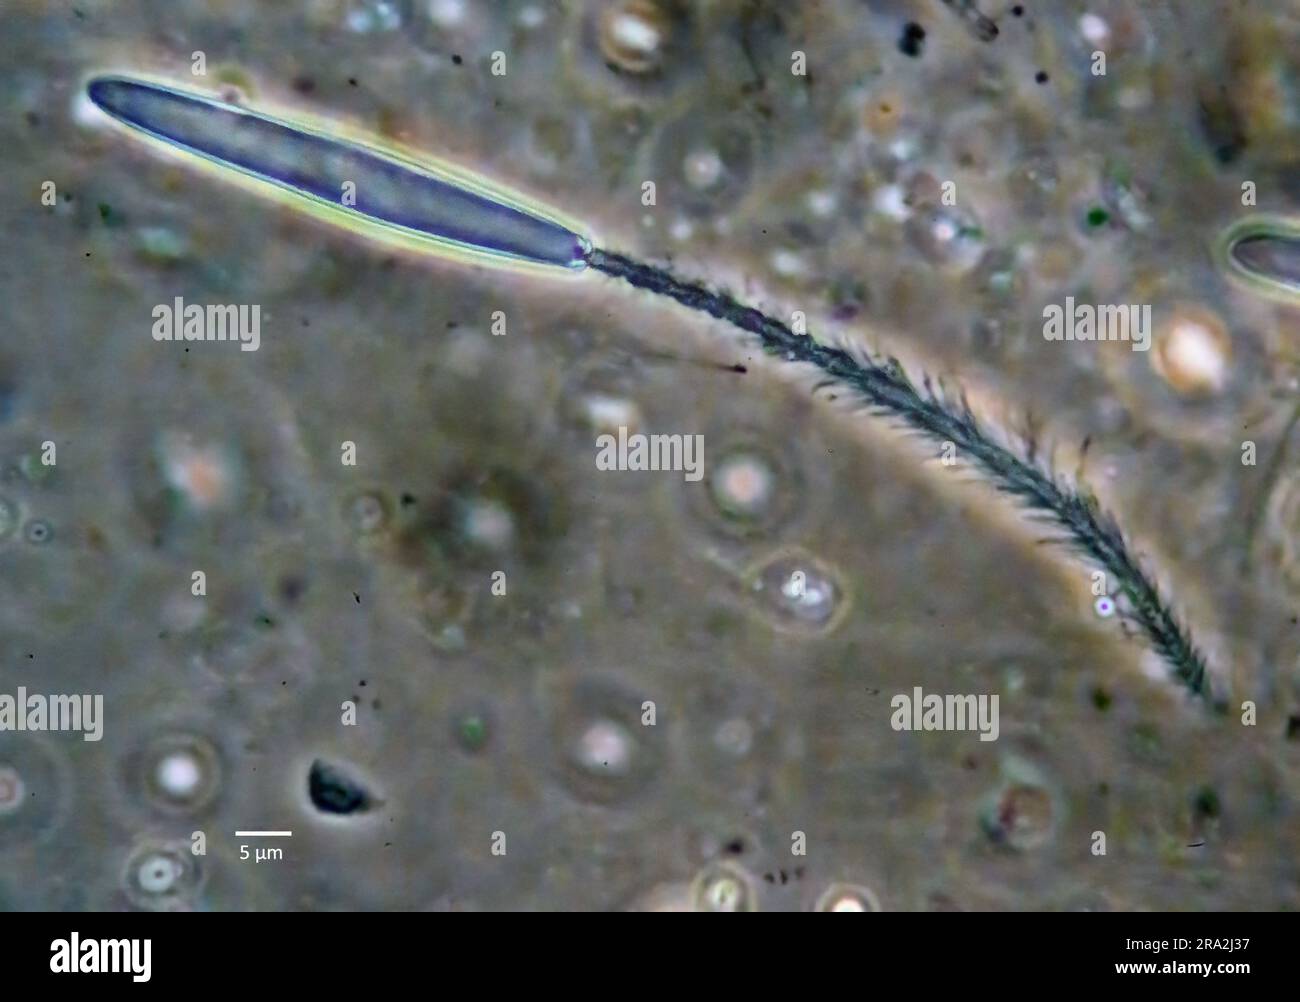 Expanded stinging cell (cnidocyte or nematocyst) from the anemone Aiptasia sp. Stock Photo